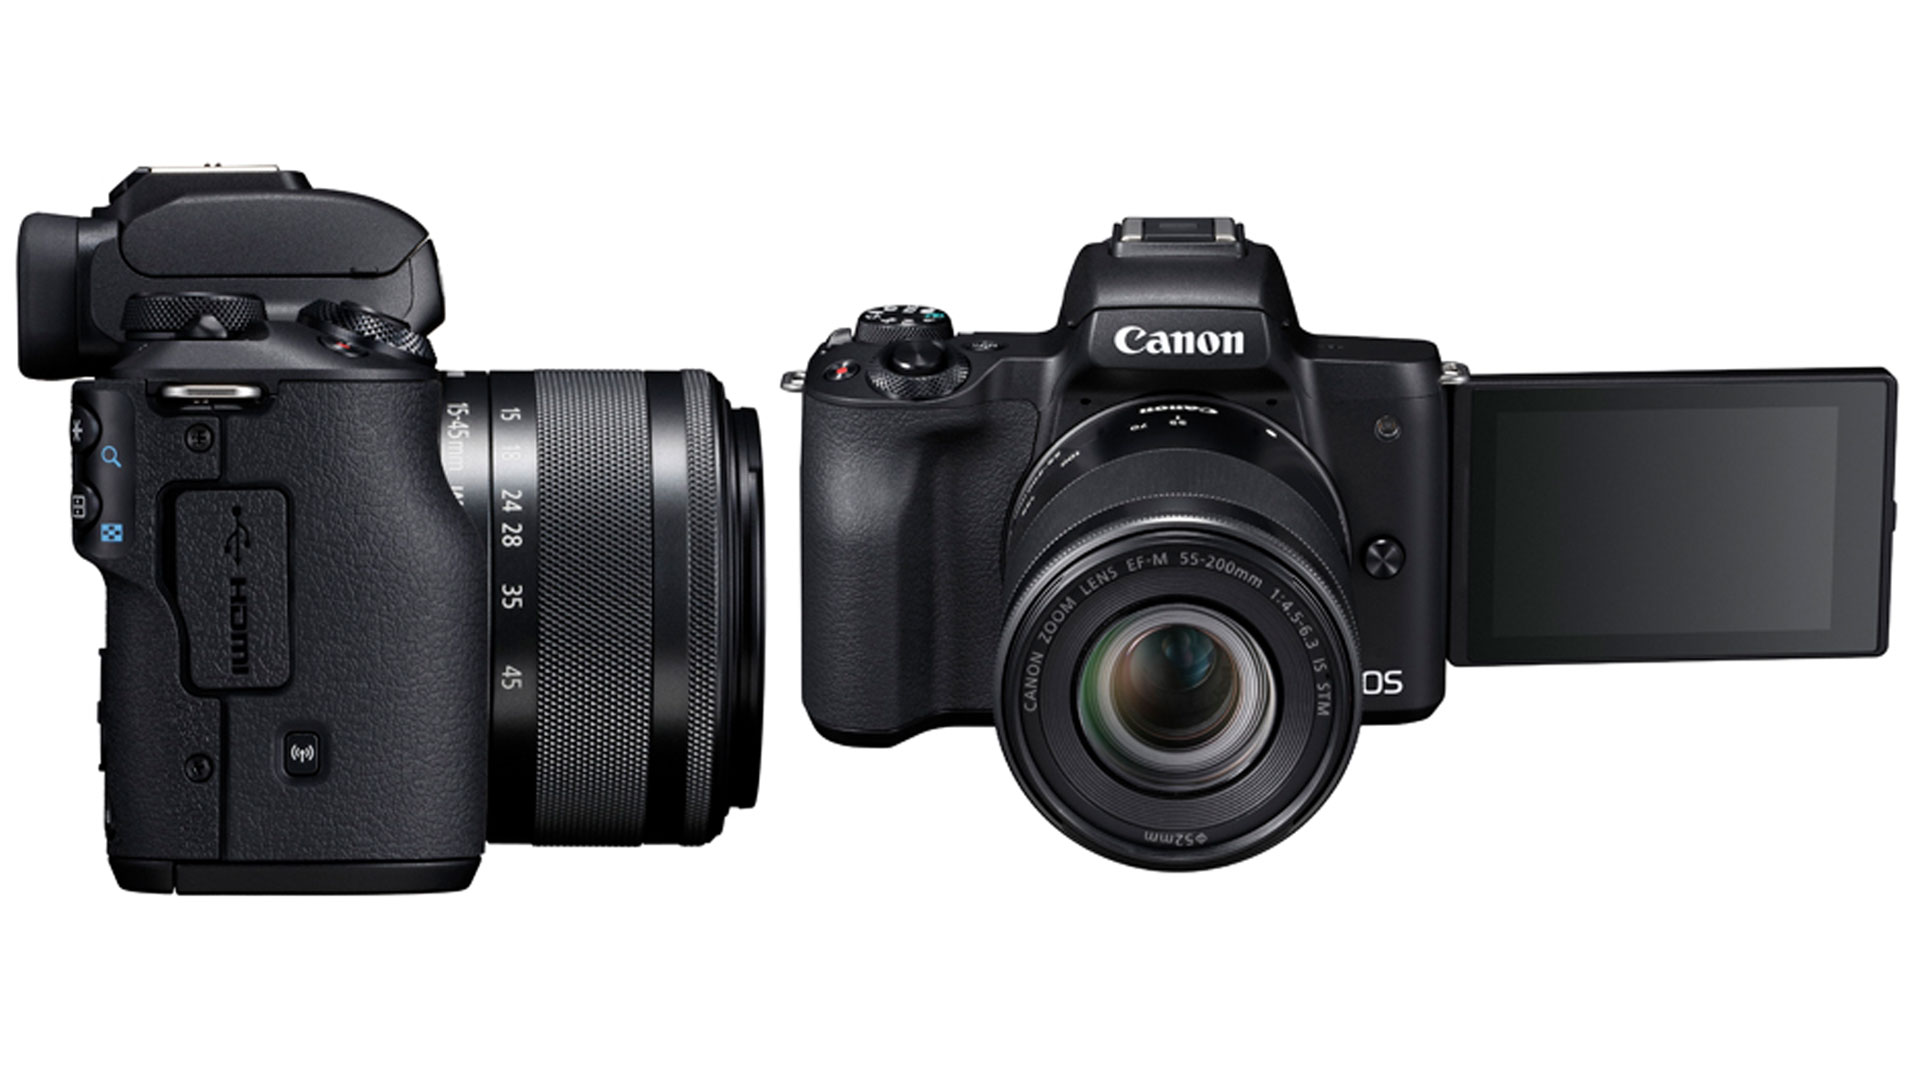 Canon M50 Review: Canon releases their first 4K mirrorless